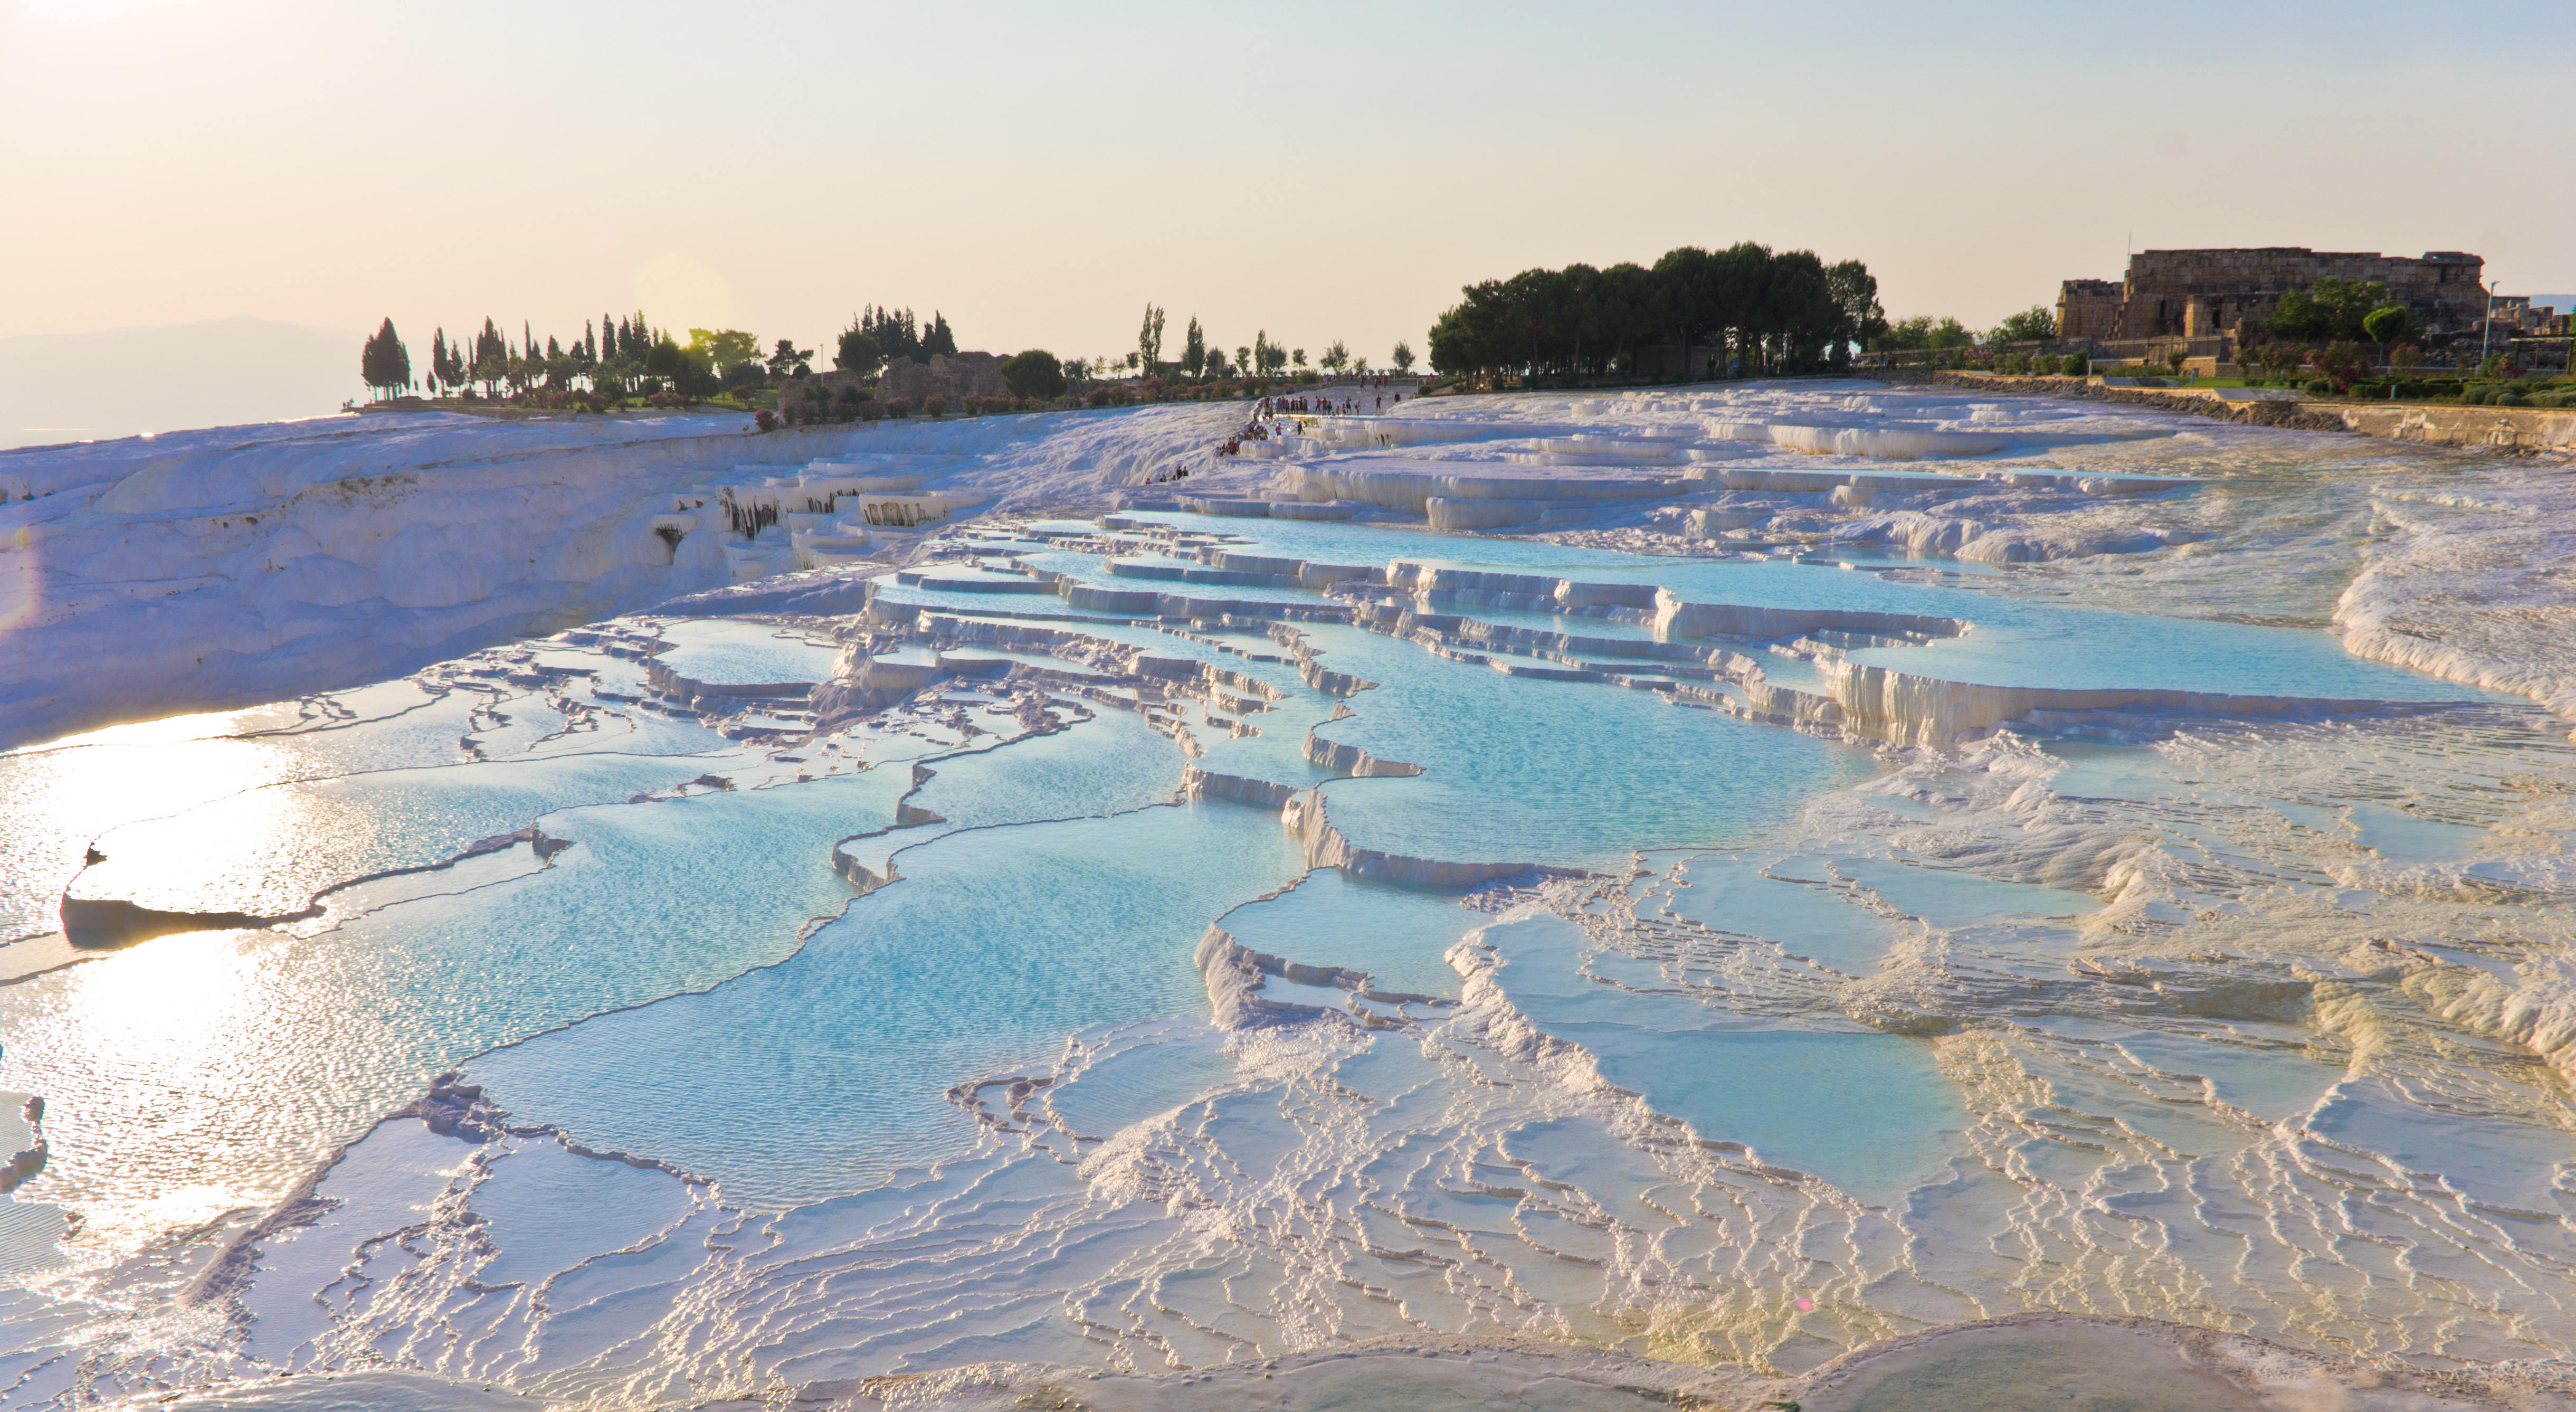 A view of Pamukkale